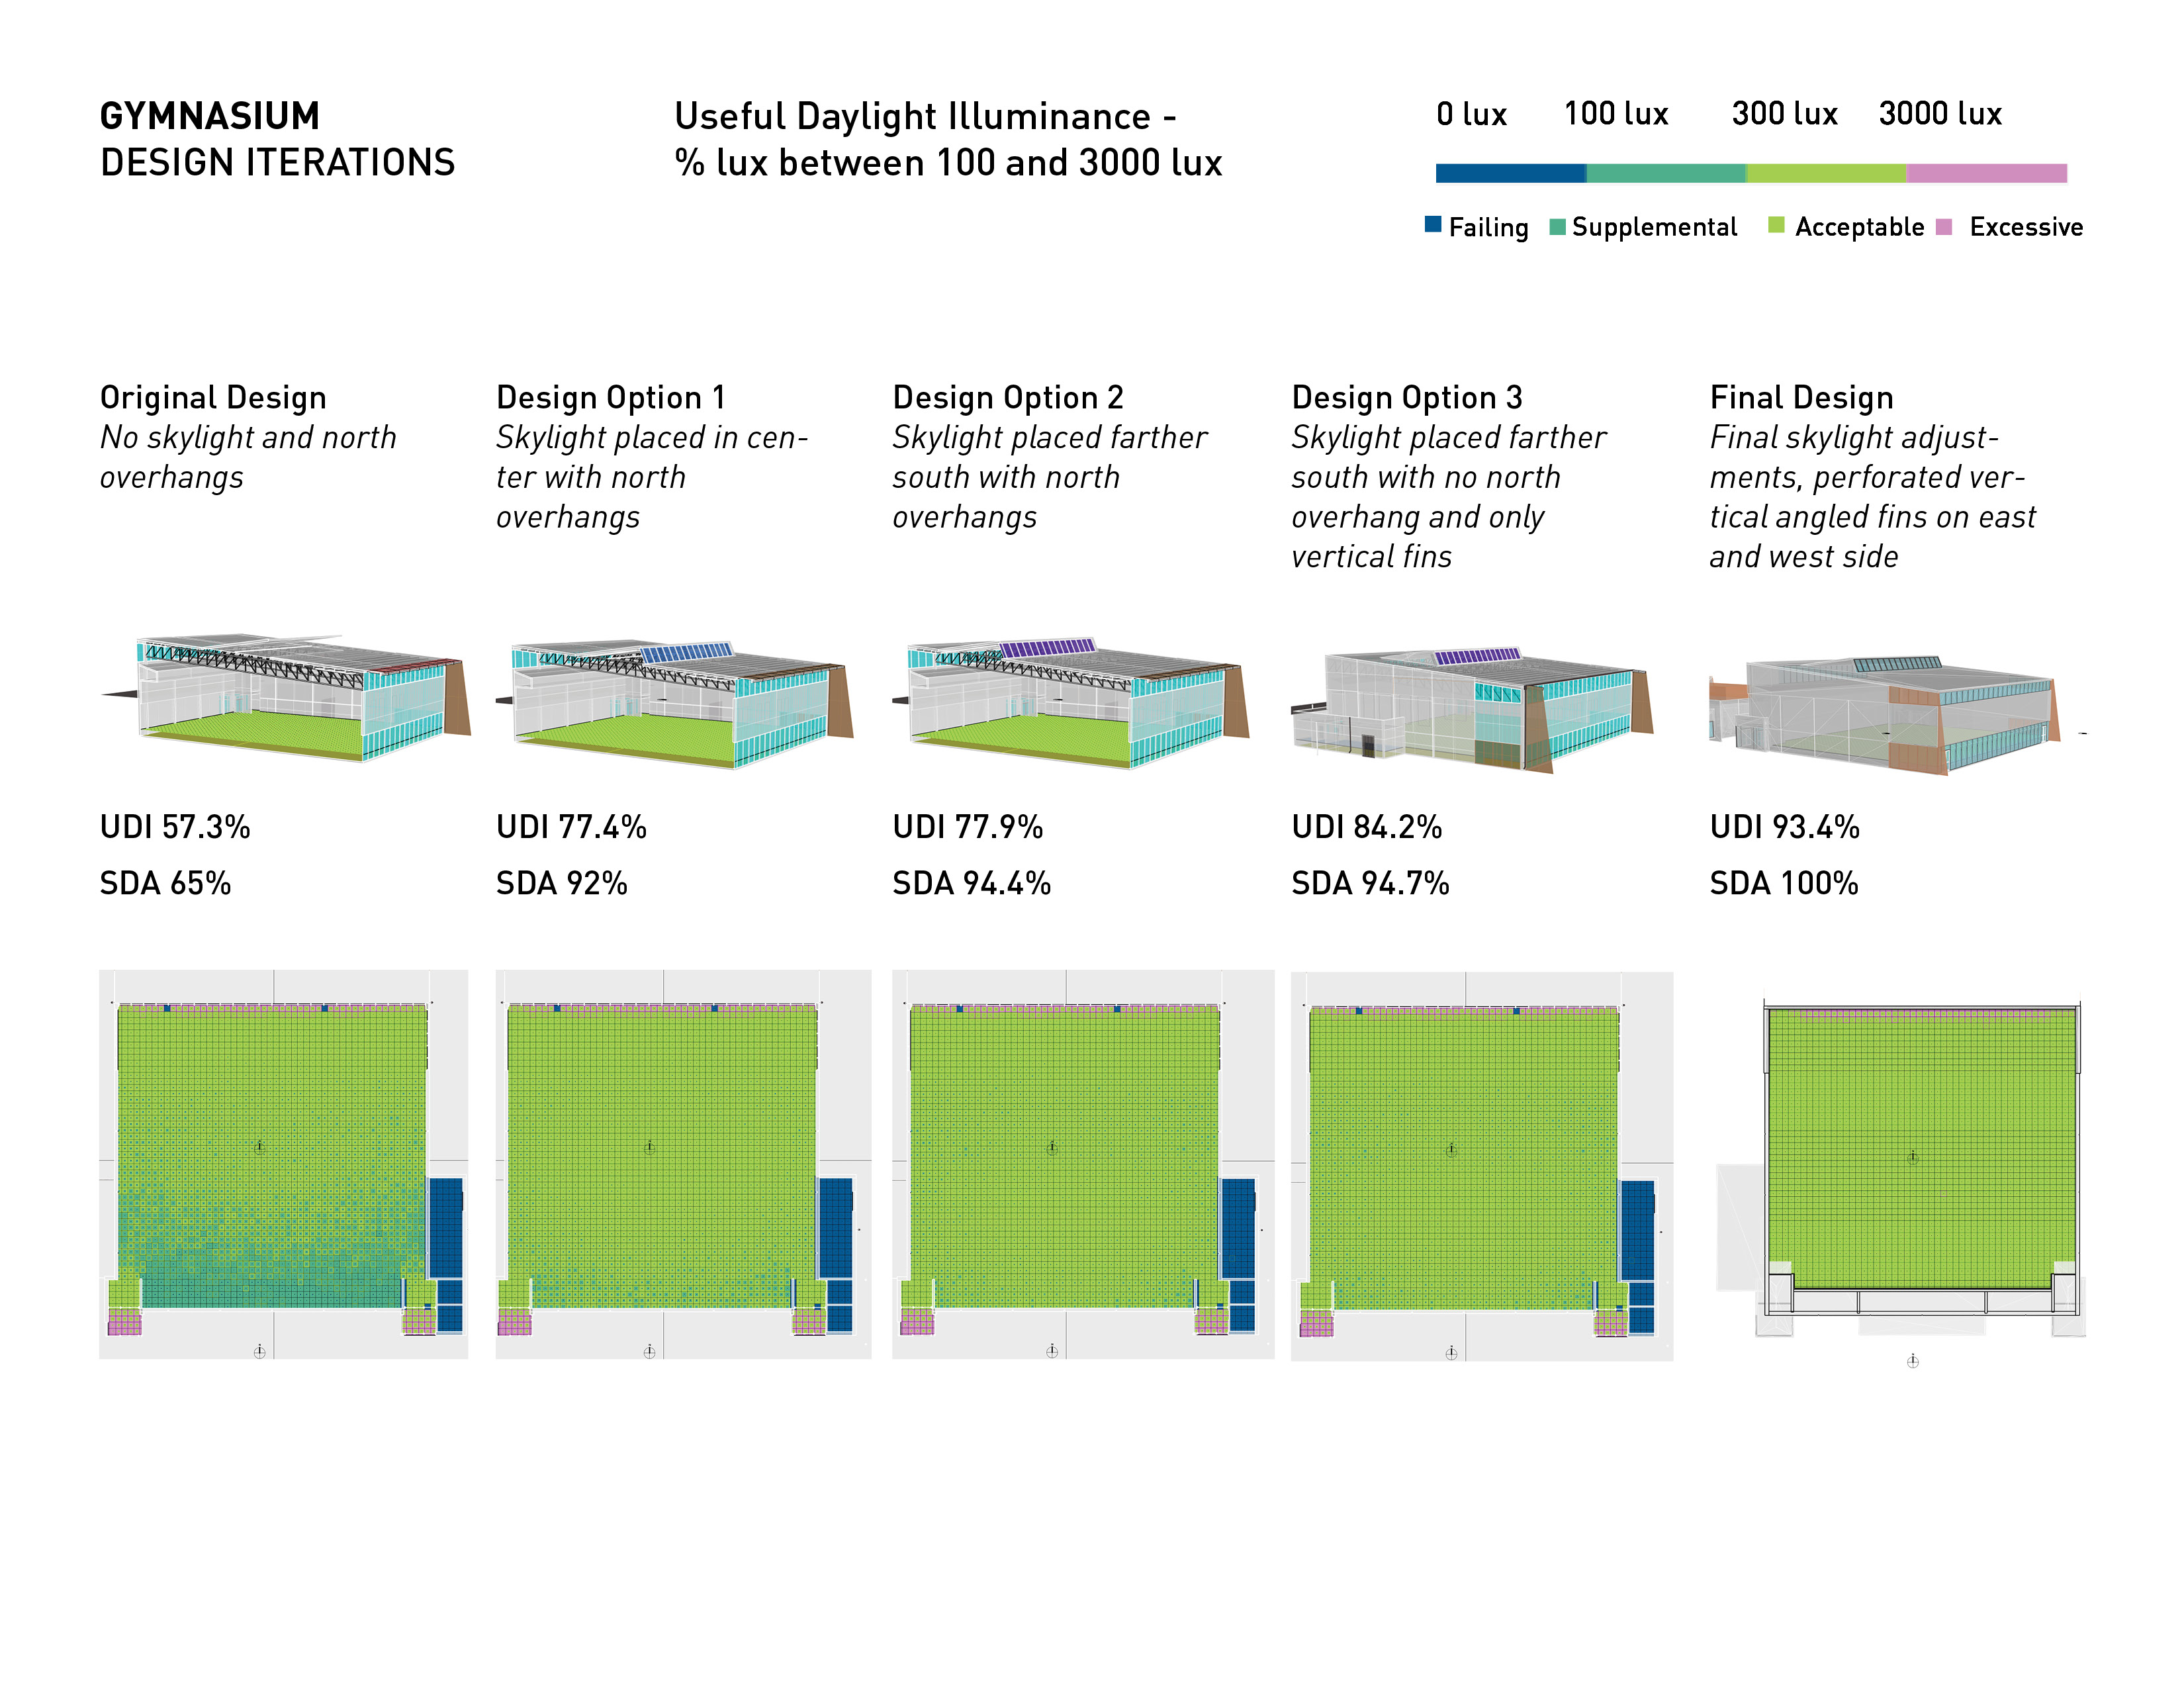 Progression of designs to maximize useful daylight for the gymnasium building at Alamogordo Middle School.